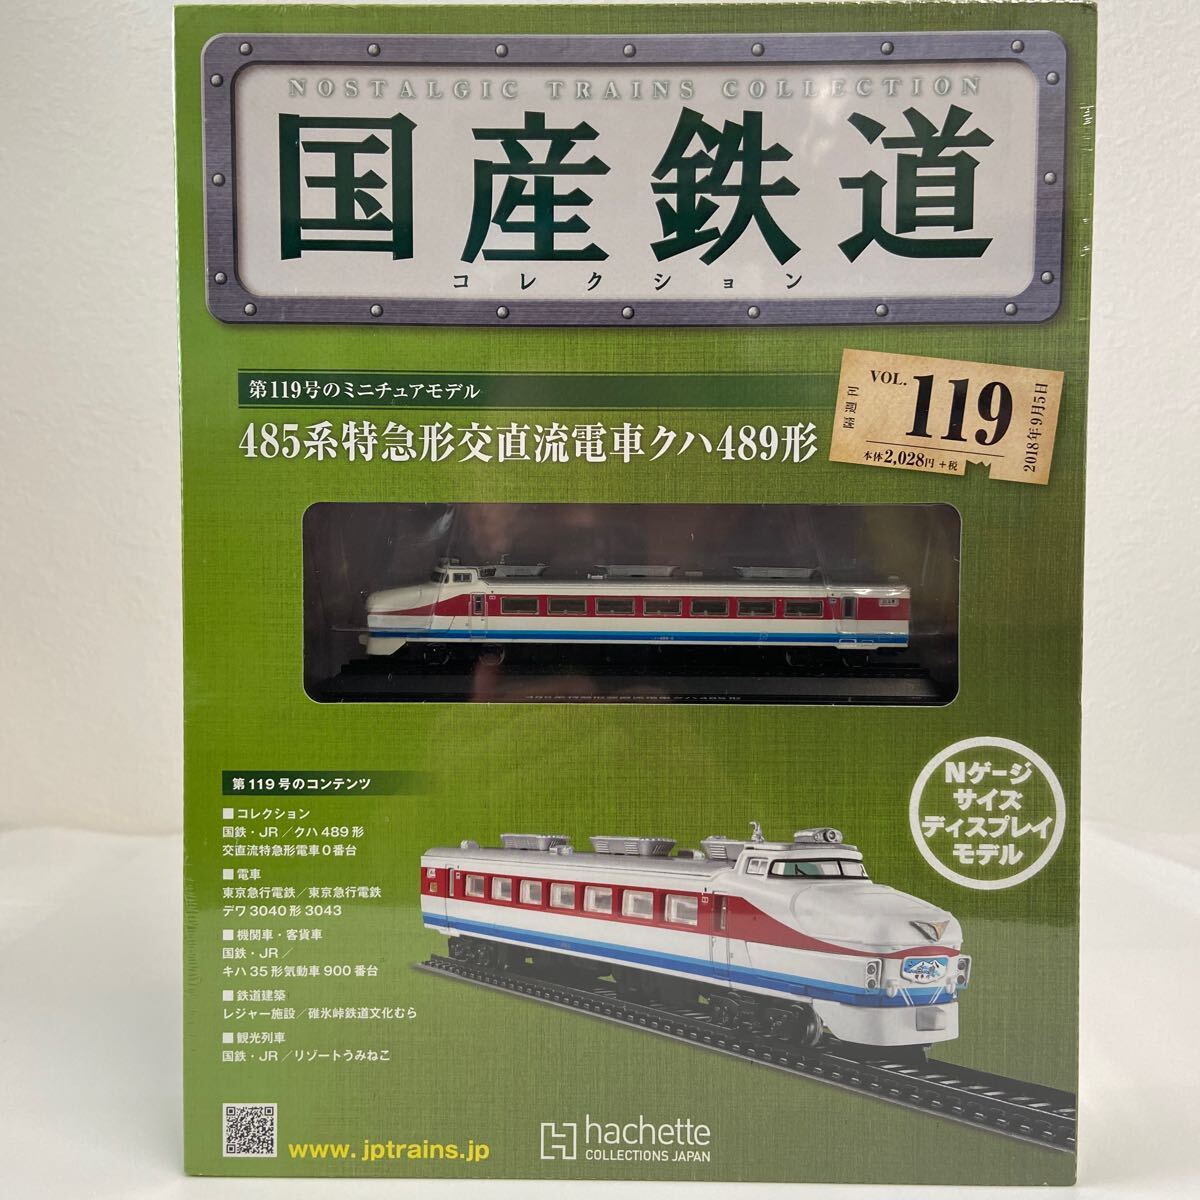 asheto domestic production railroad collection #119 485 series Special sudden shape . direct current train k is 489 shape Hakusan N gauge size display model miniature model 